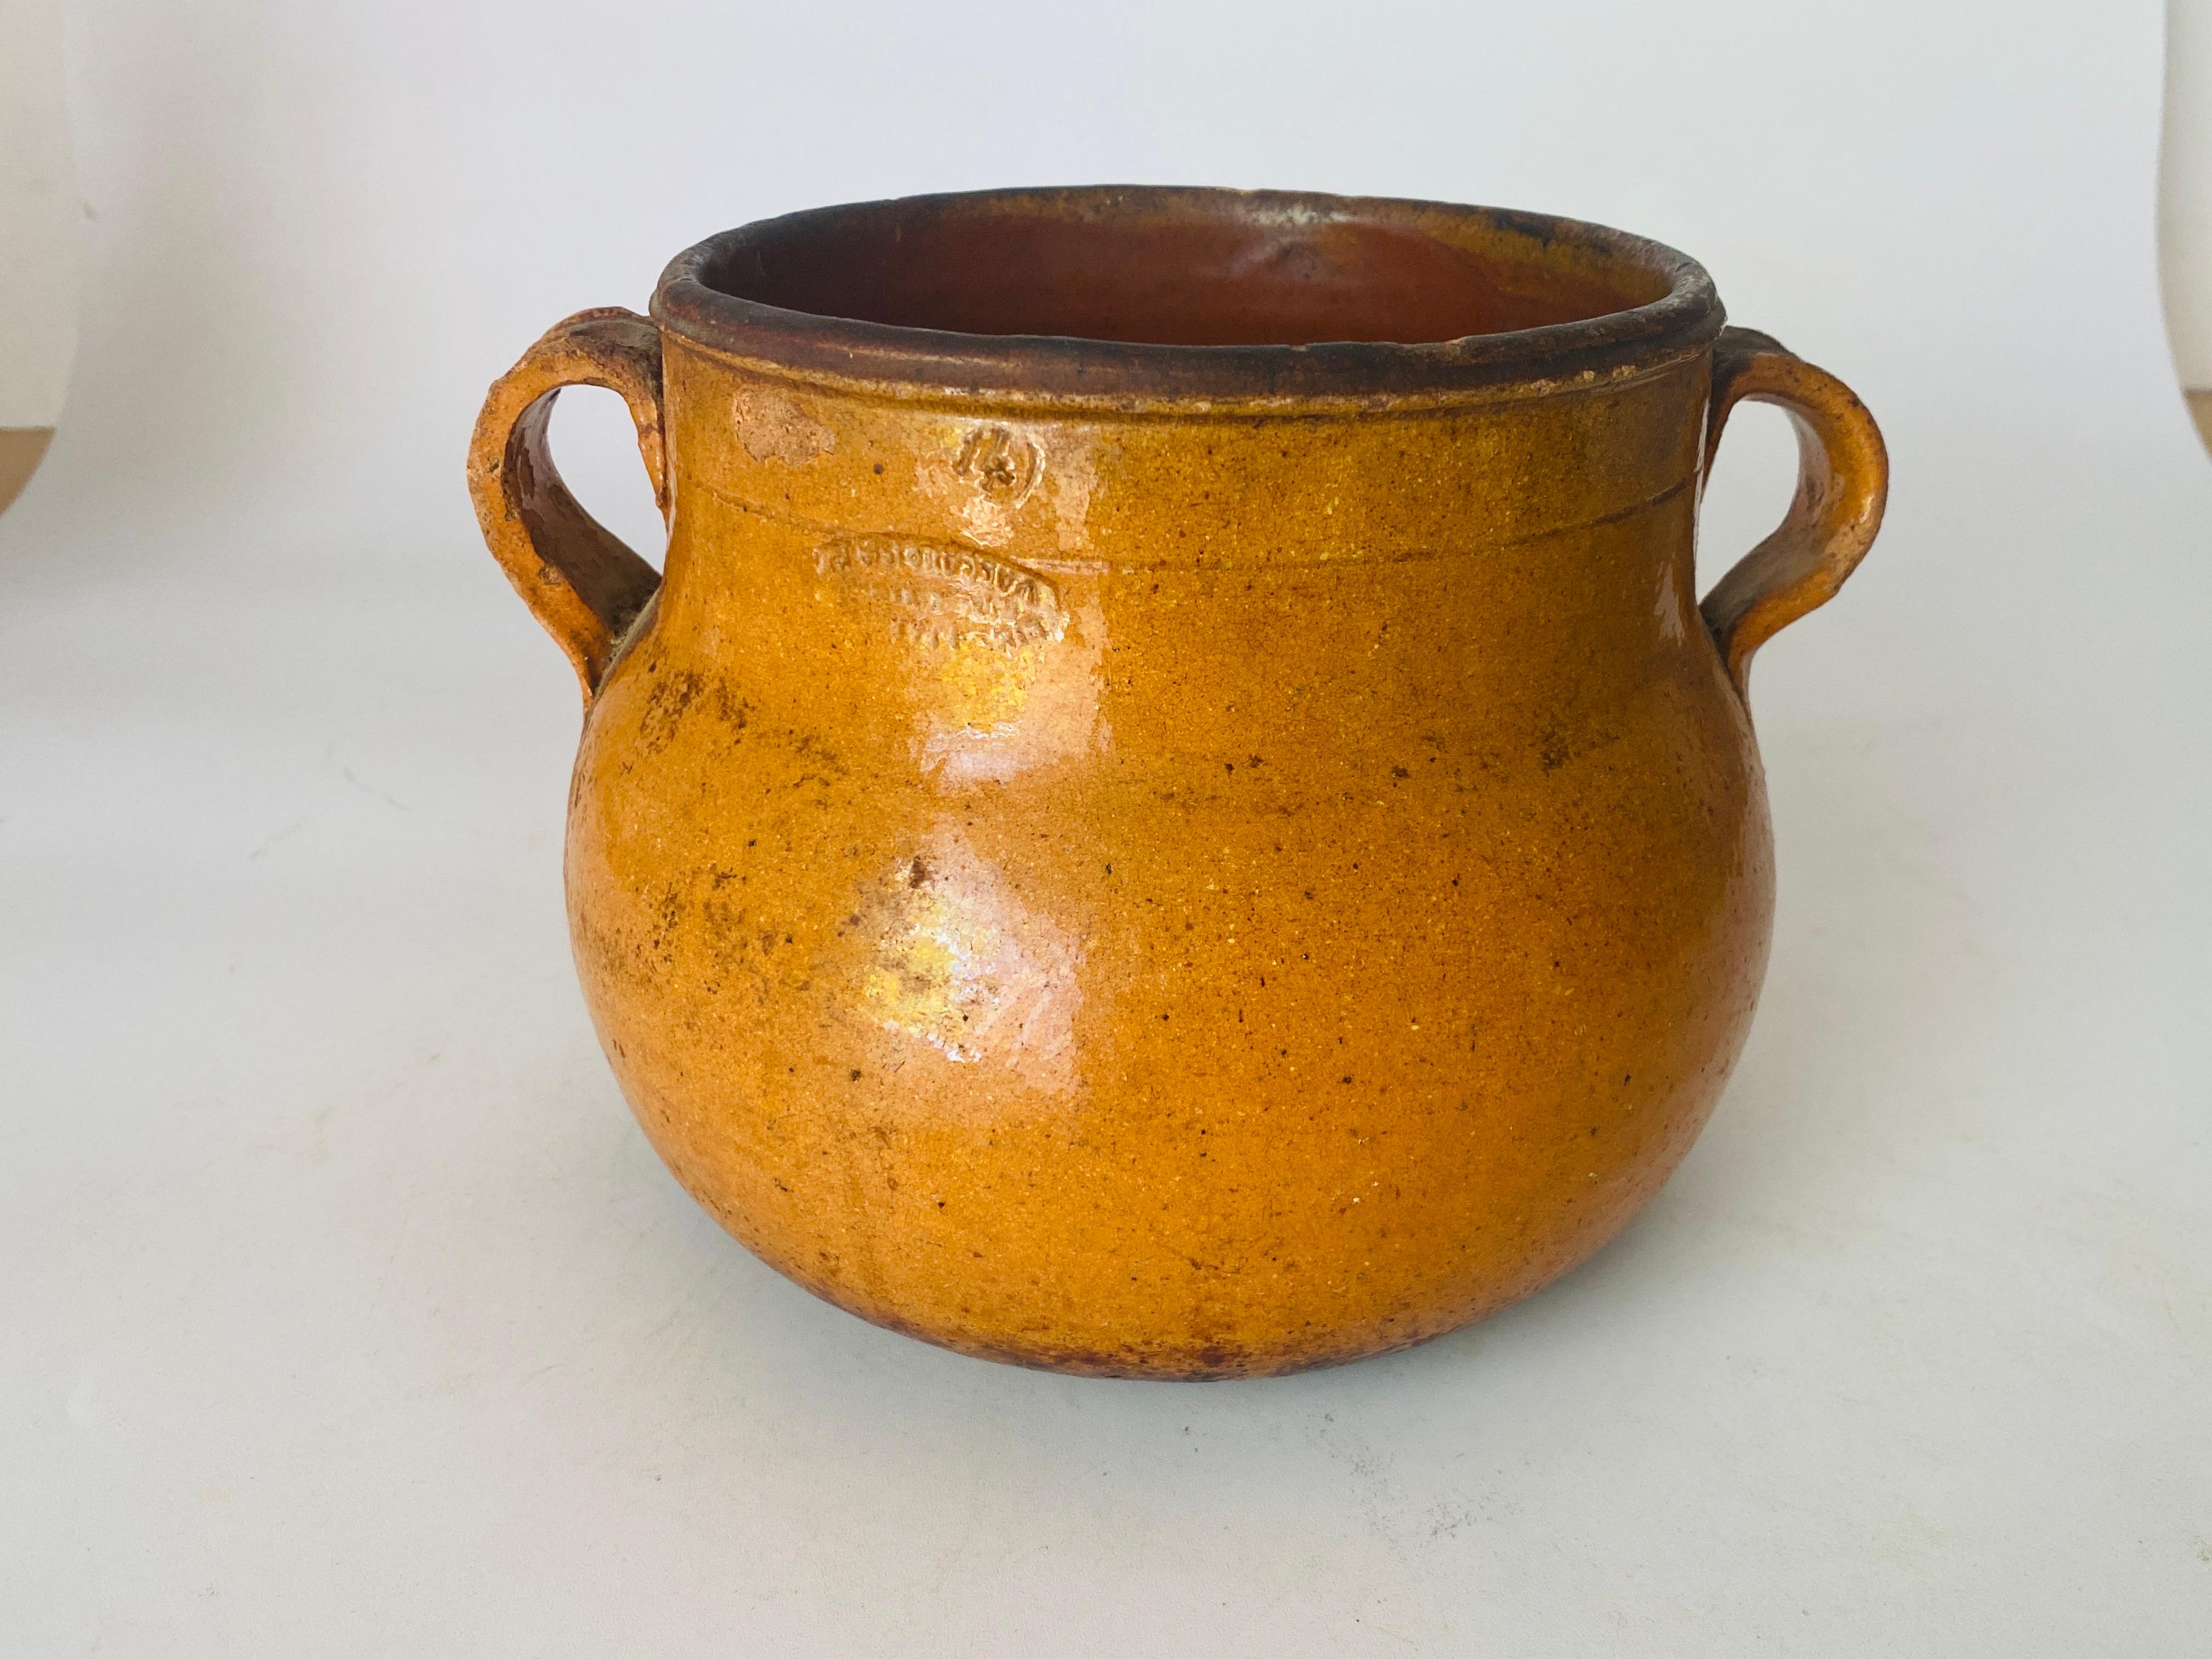 French Provincial 19th Century French Glazed Confit Pot Glazed Earthenware Pot For Sale